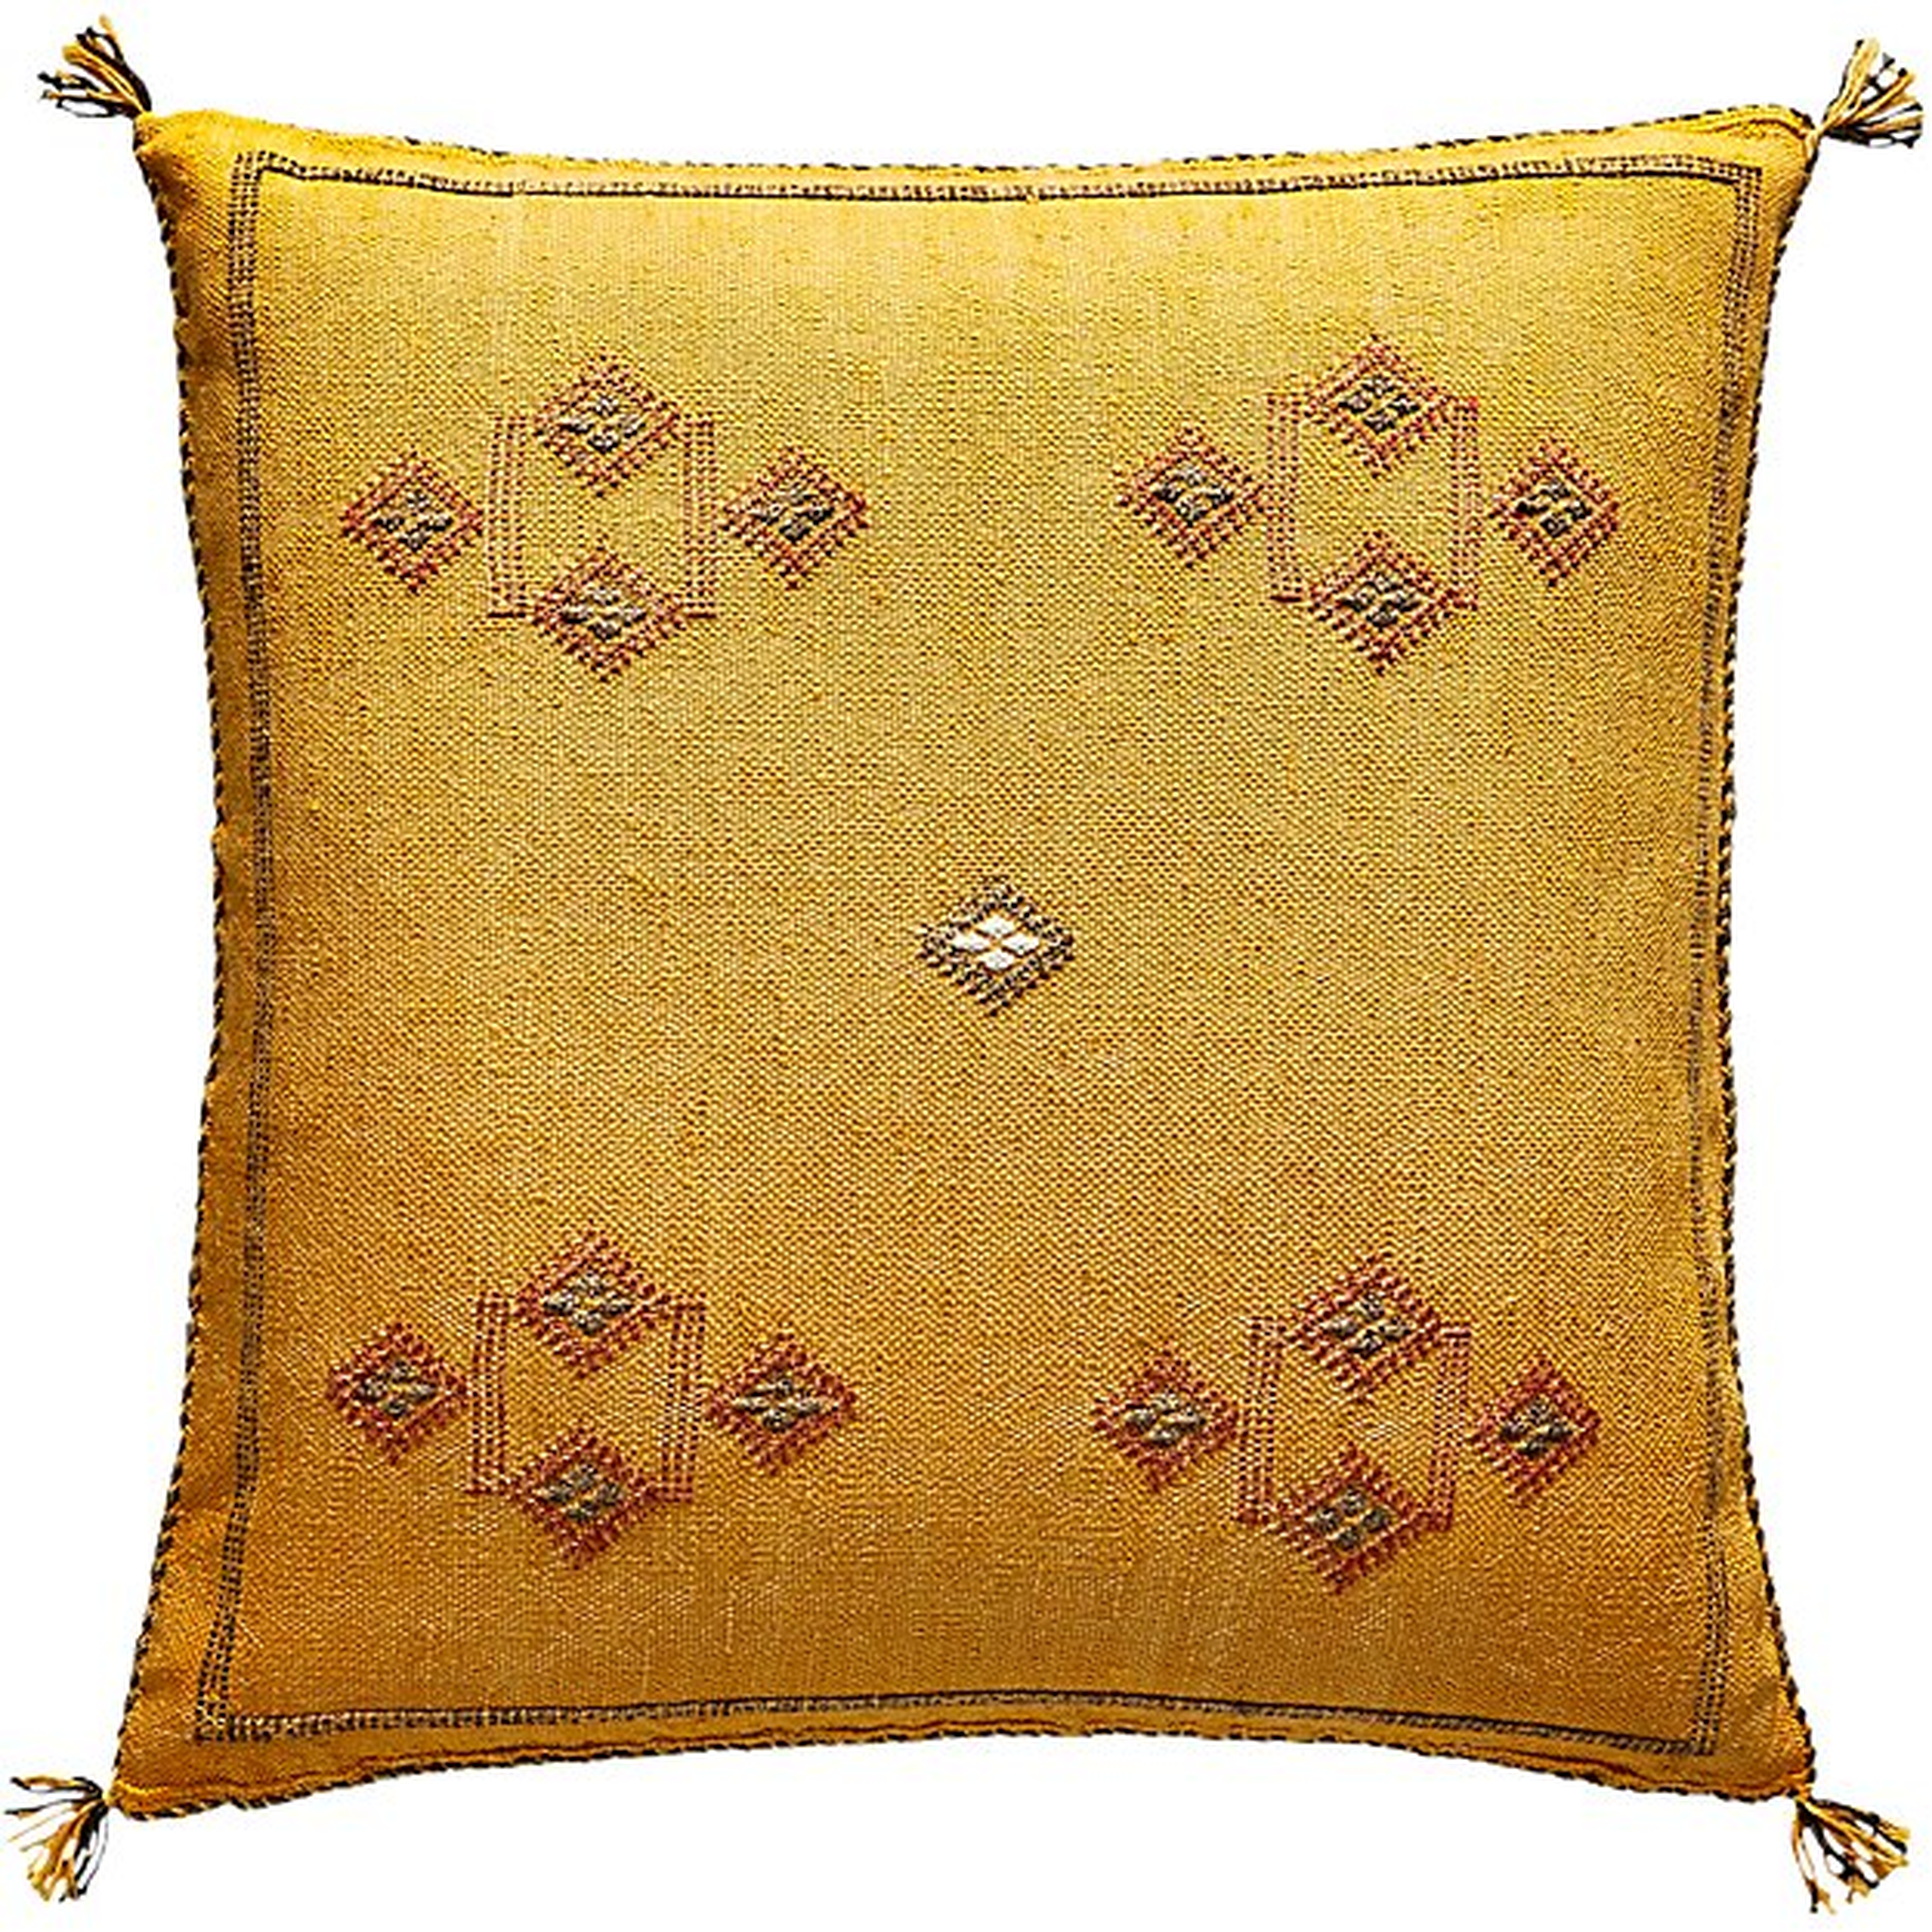 20" cactus silk mustard yellow pillow with feather-down insert - CB2